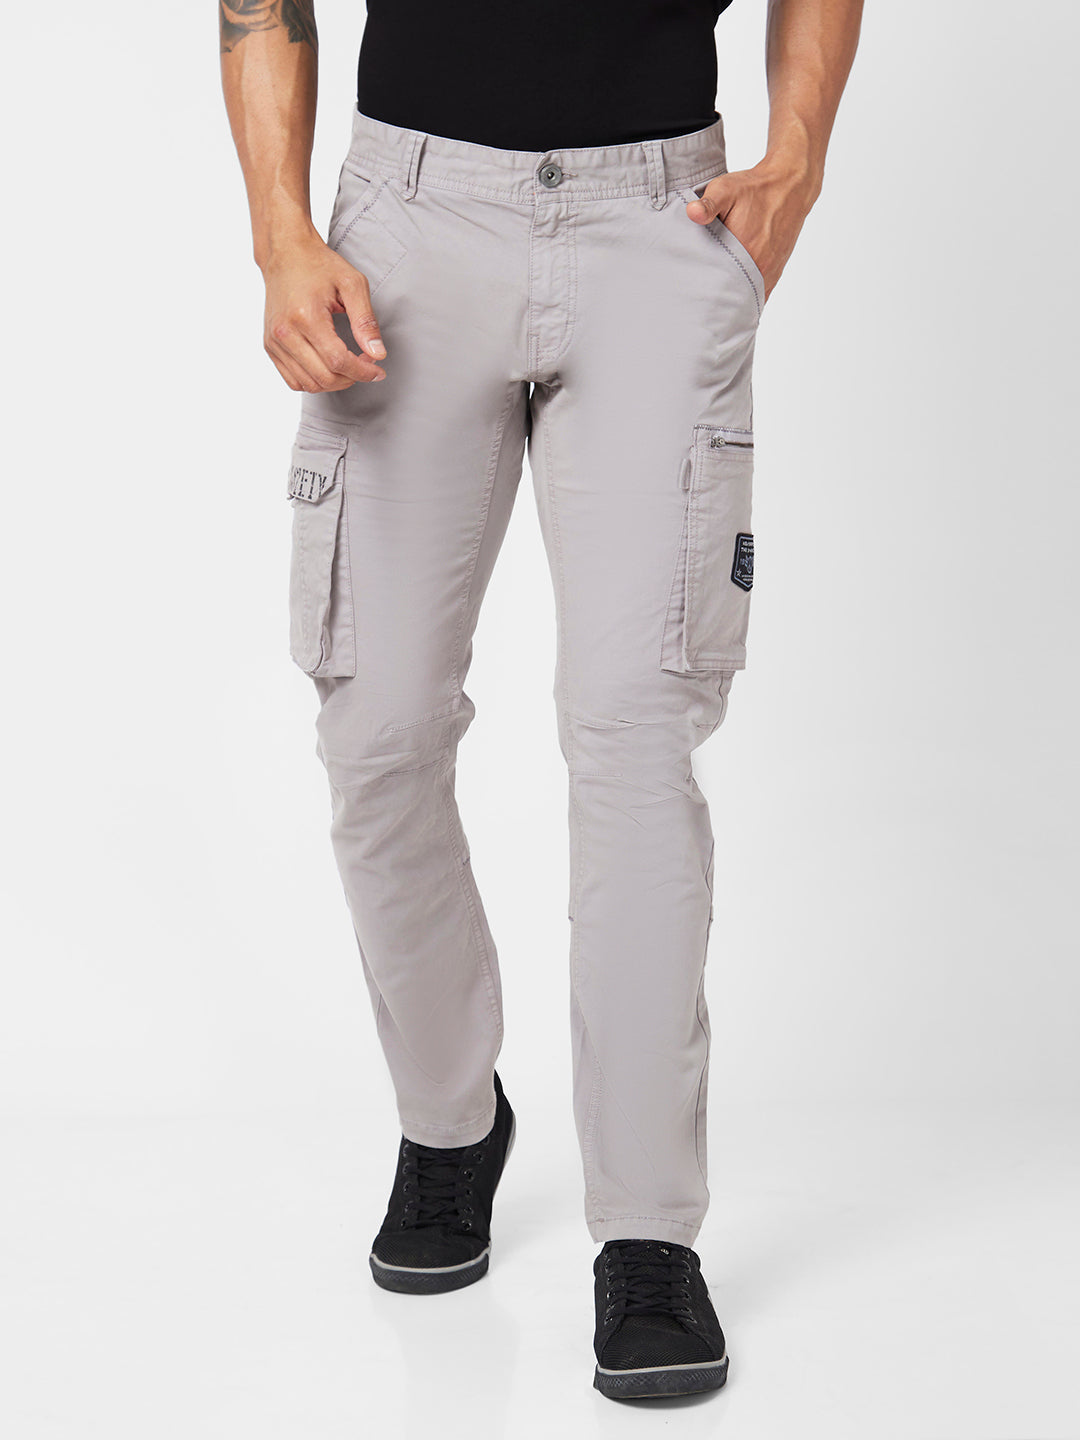 Light Grey Check Ankle-Length [waist rise] Formal Men Slim Fit Trousers -  Selling Fast at Pantaloons.com